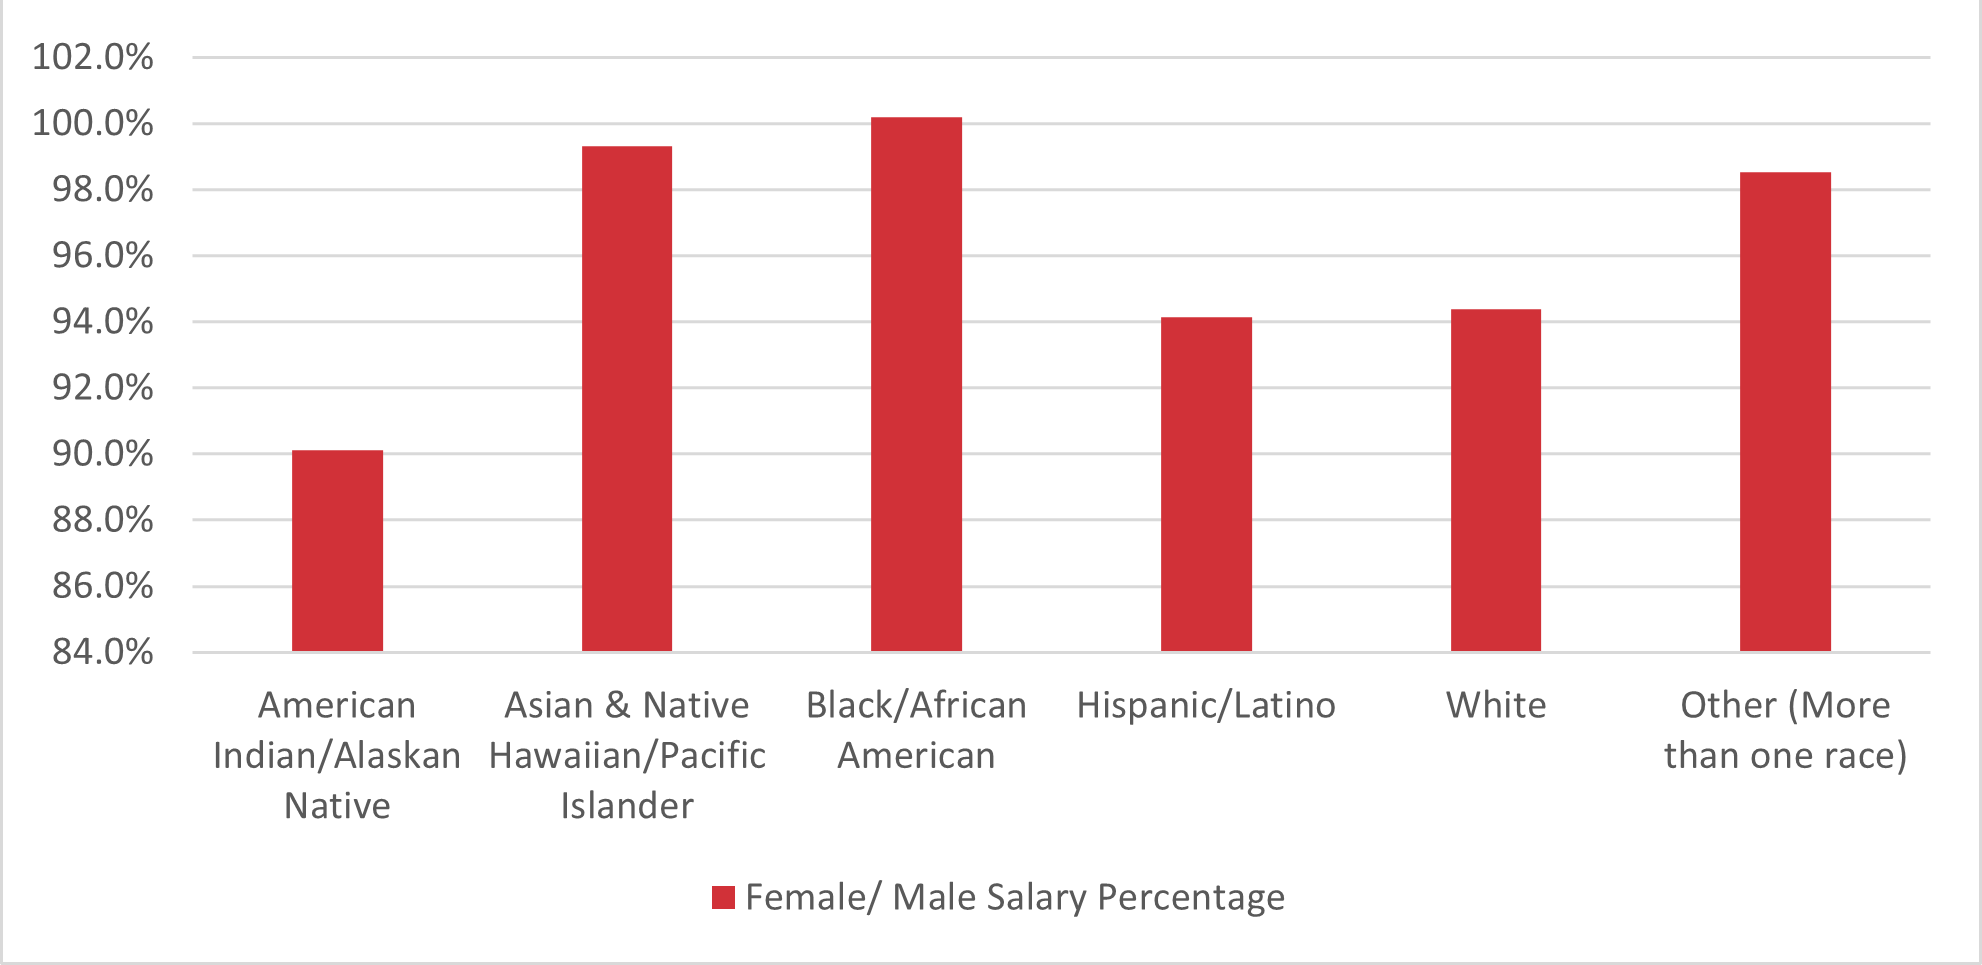 Female/Male Salary Percentage for Each Racial/Ethnic Group bar graph. Full text description in the table 3d.